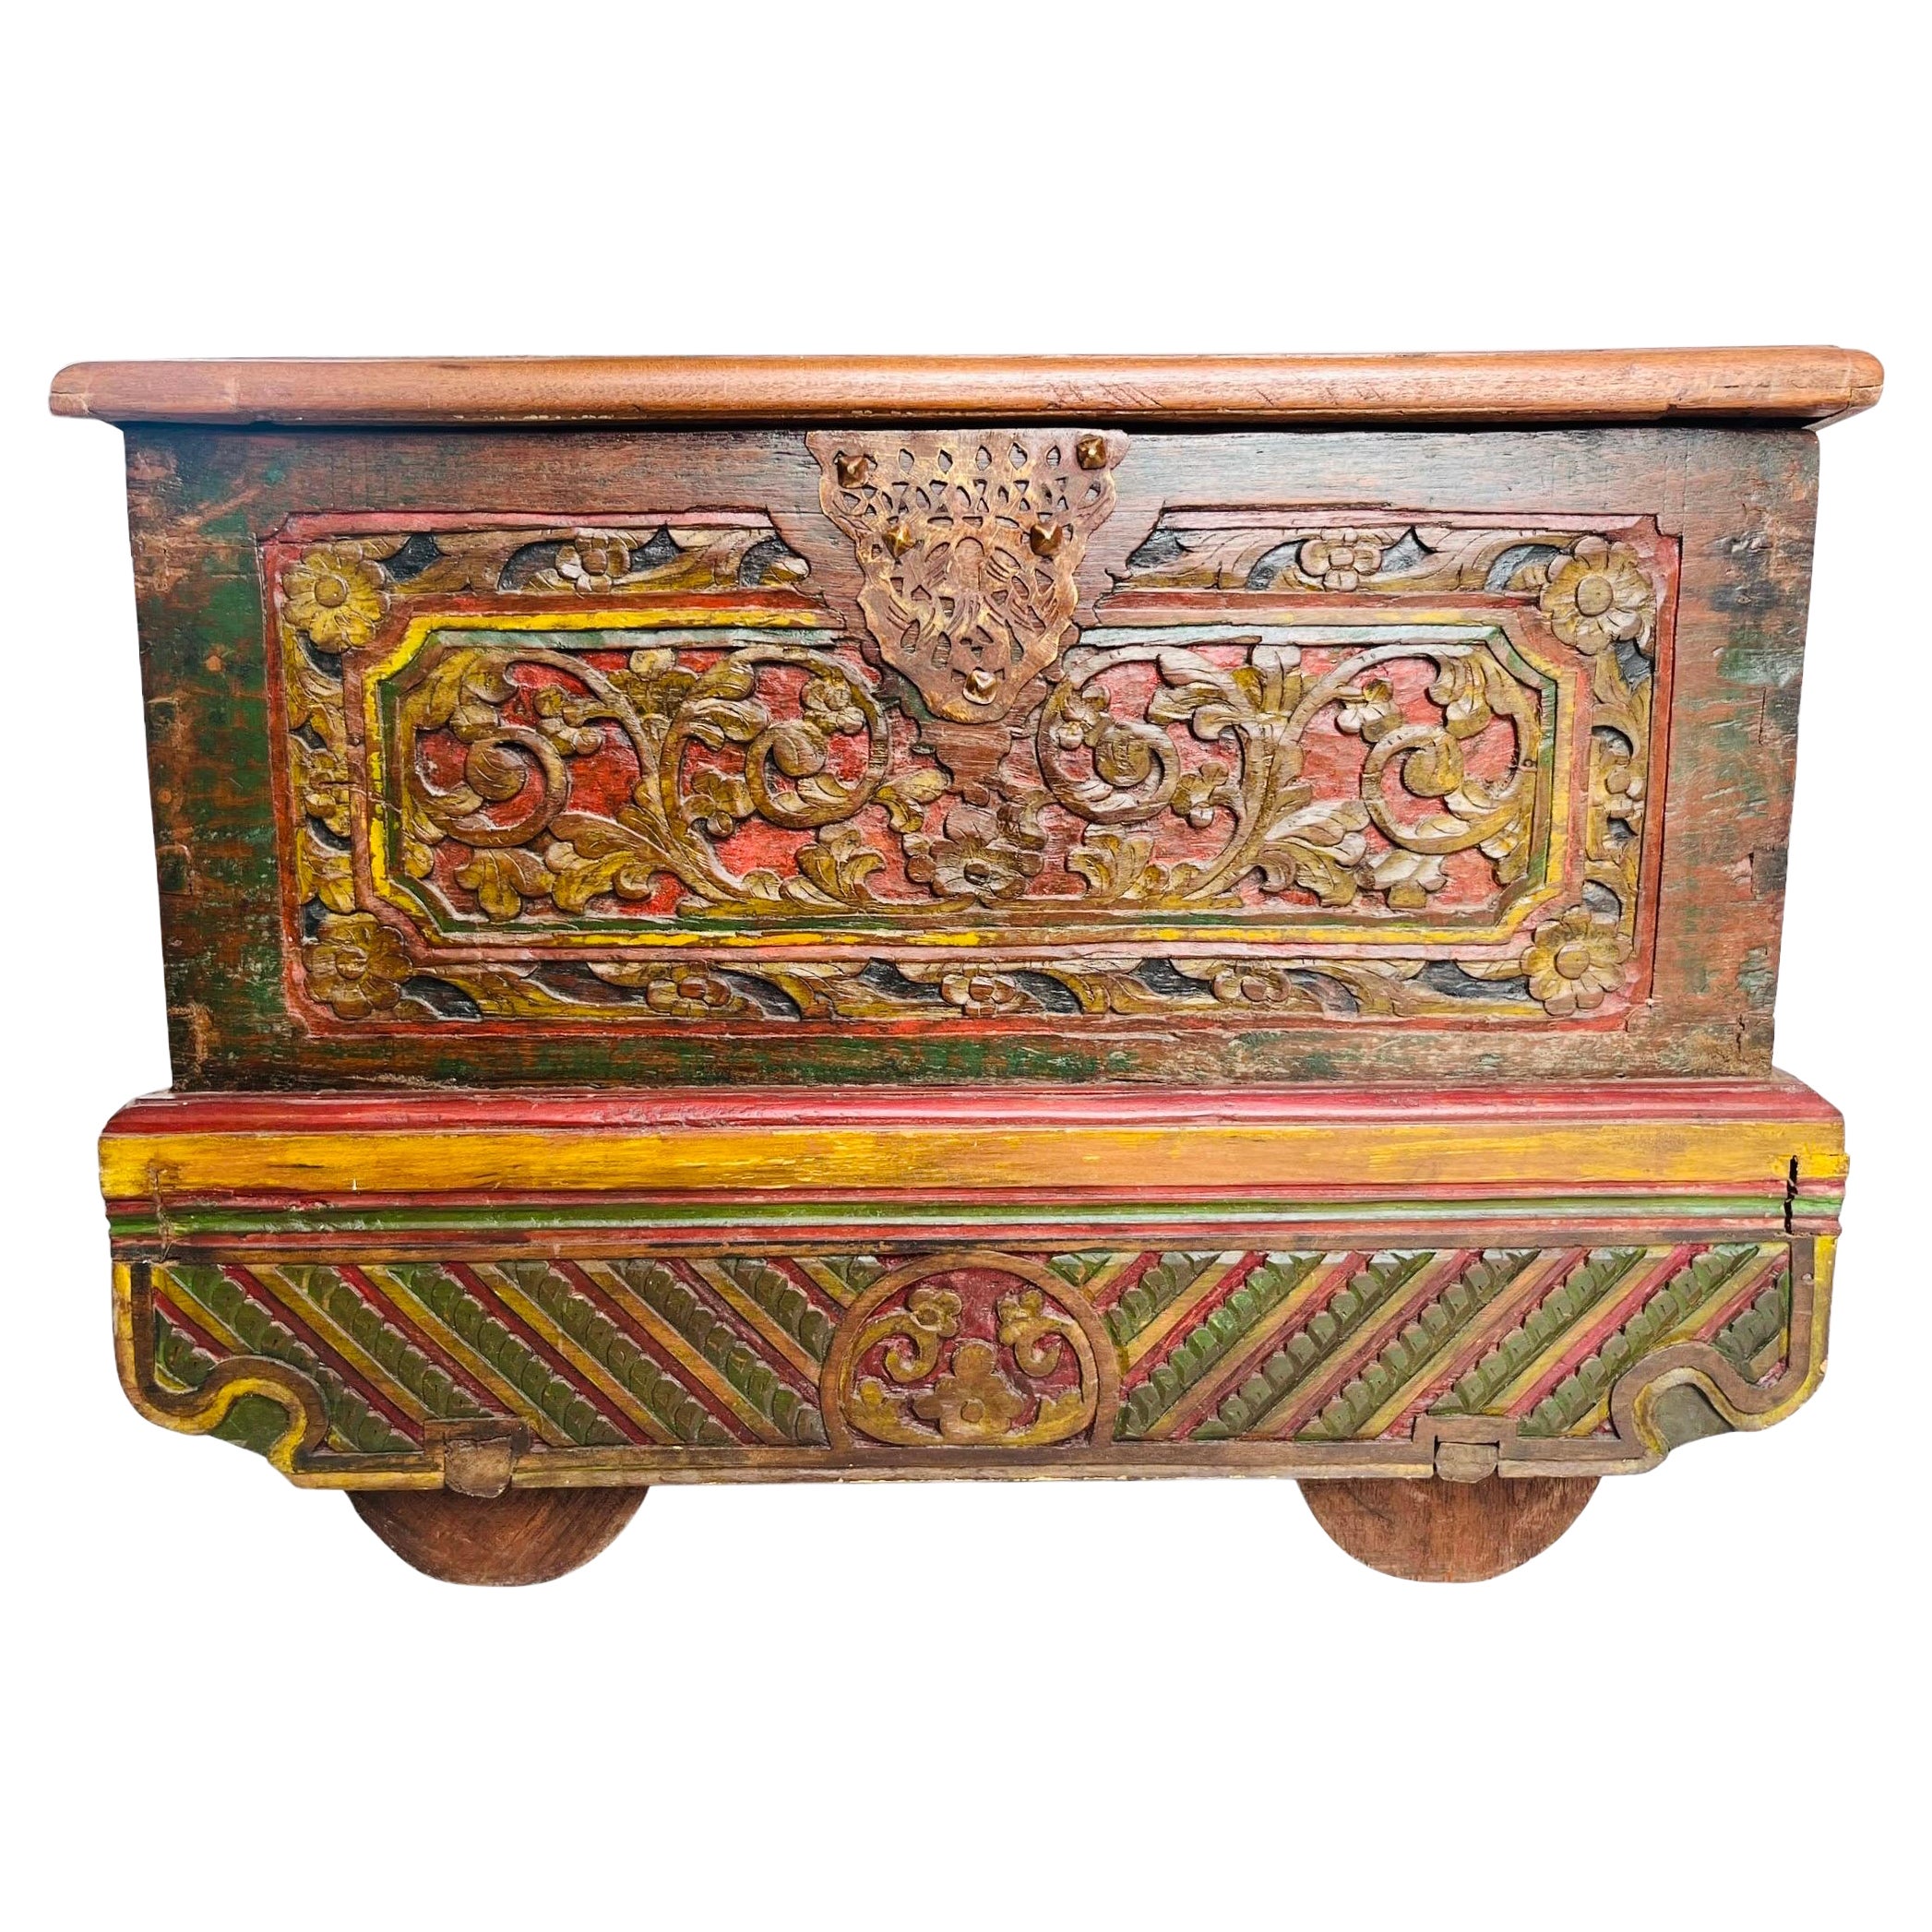 Merchant's Chest on wheels in carved and painted wood - Madura Indonesia 19th